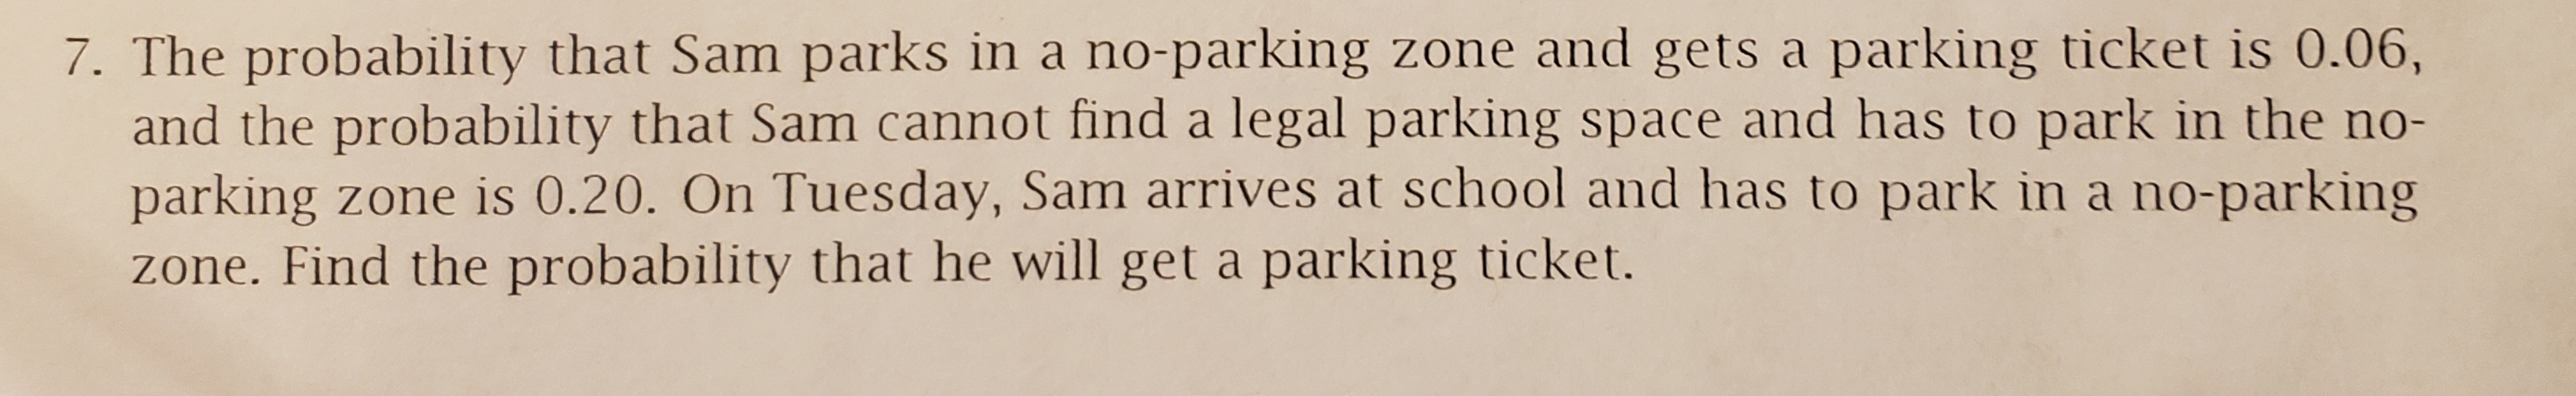 7. The probability that Sam parks in a no-parking zone and gets a
and the probability that Sam cannot find a legal parking space and has to park in the no-
parking zone is 0.20. On Tuesday, Sam arrives at school and has to park in a no-parking
zone. Find the probability that he will get a parking ticket.
parking ticket is 0.06,
